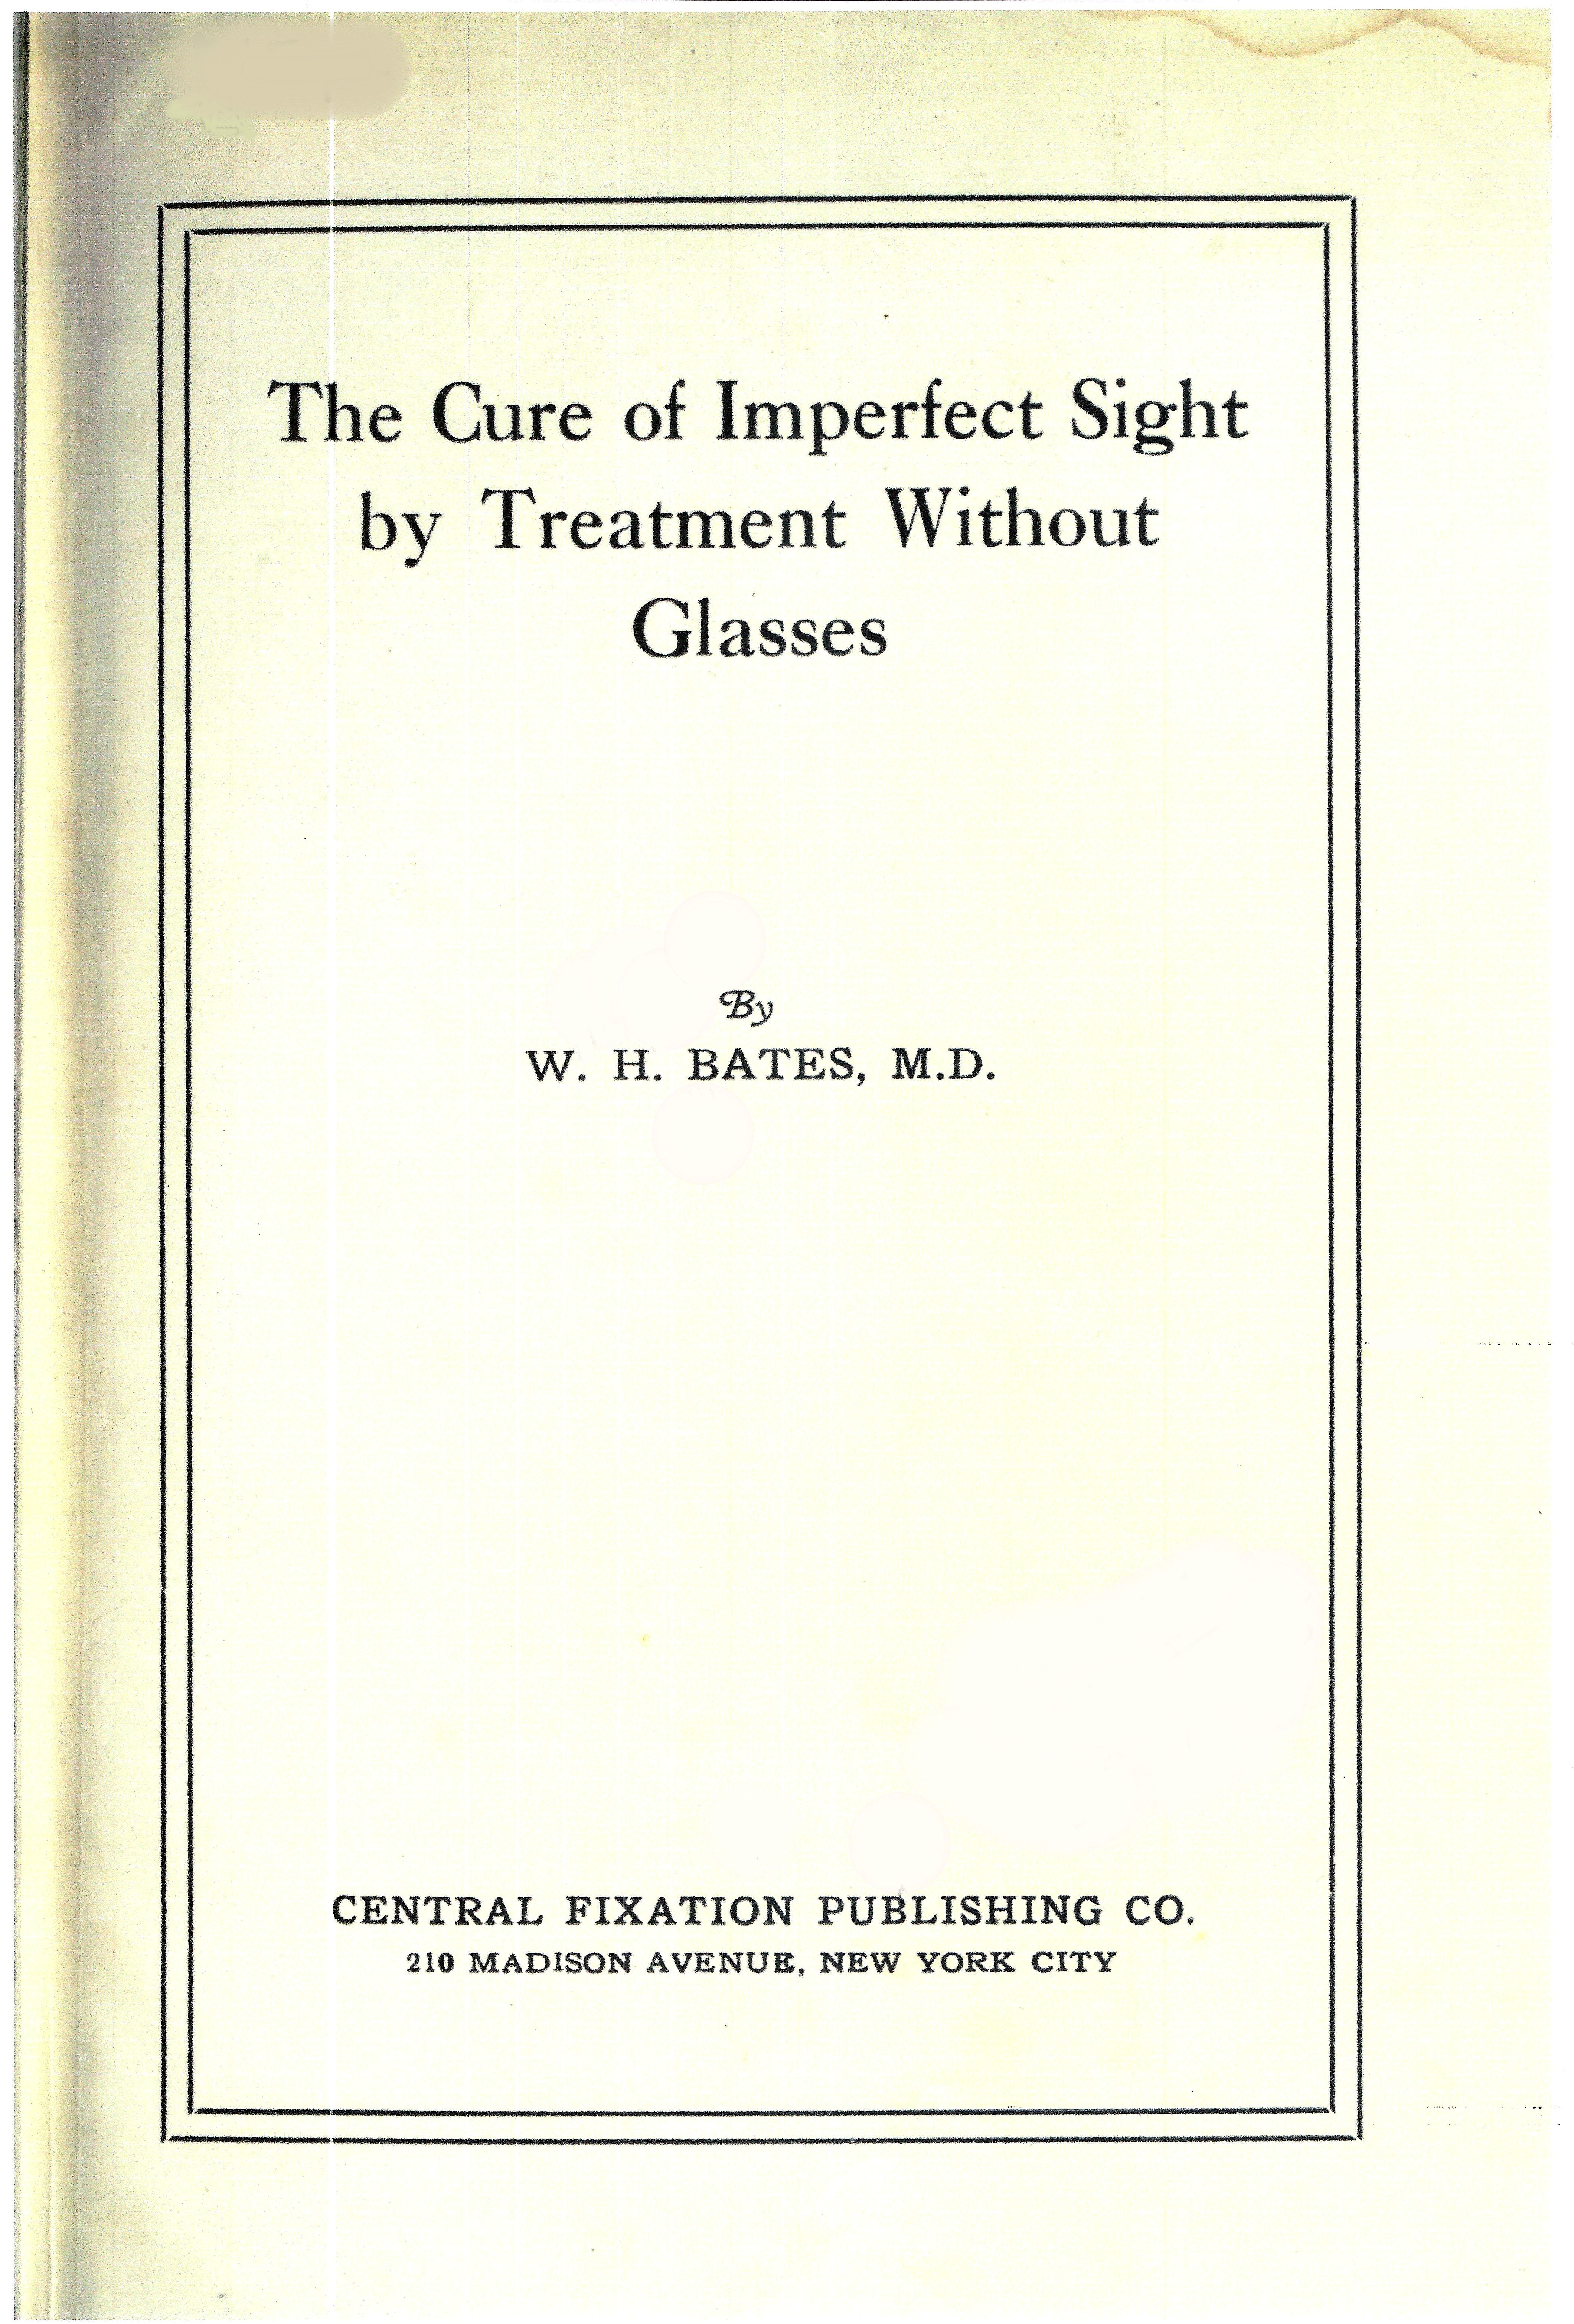 The Cure of Imperfect Sight by Treatment Without Glasses_001.jpg